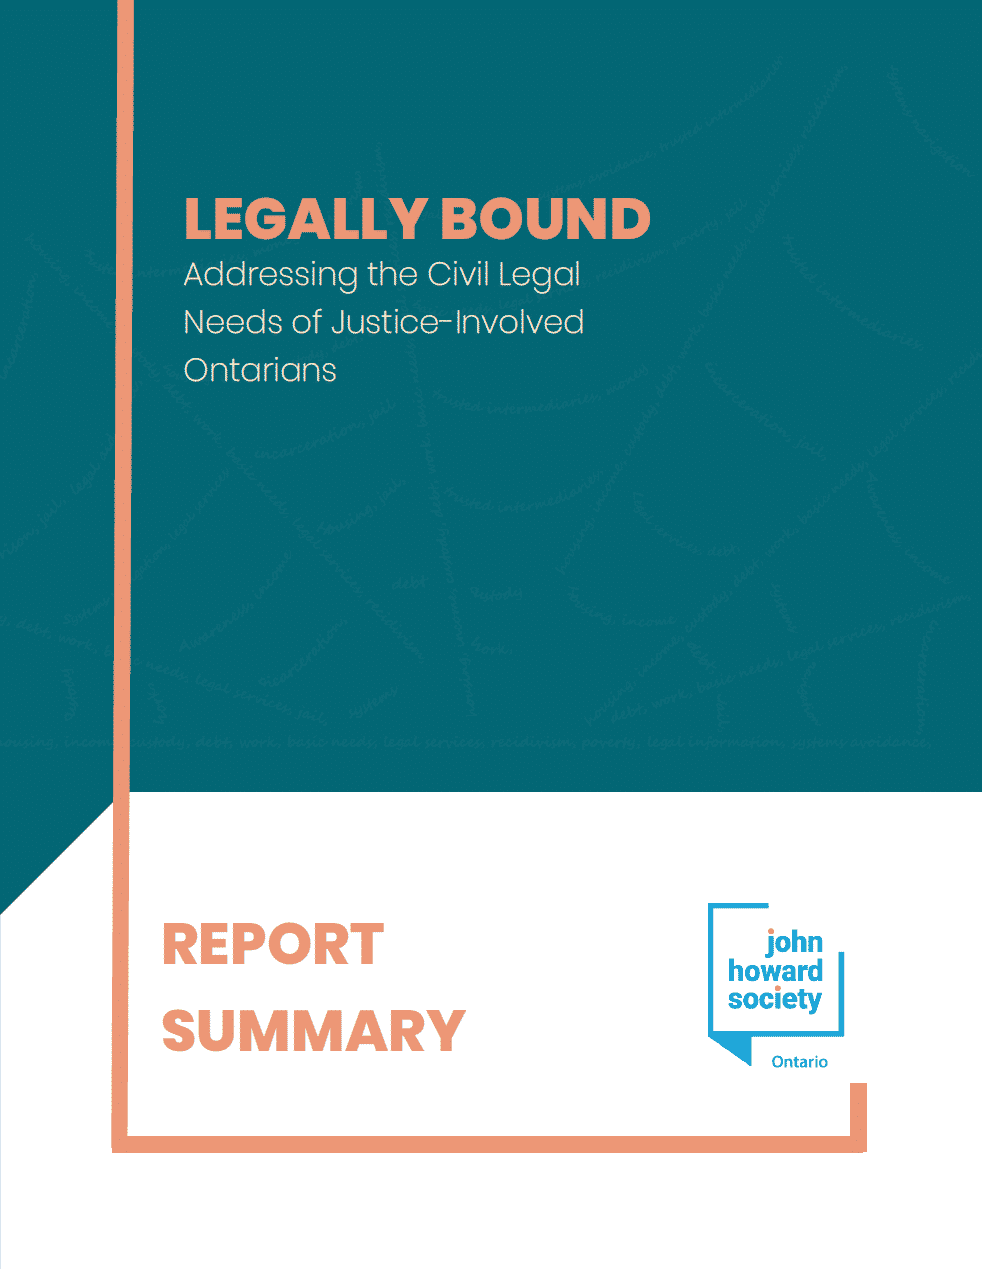 Cover of JHSO legally bound overview of data findings report